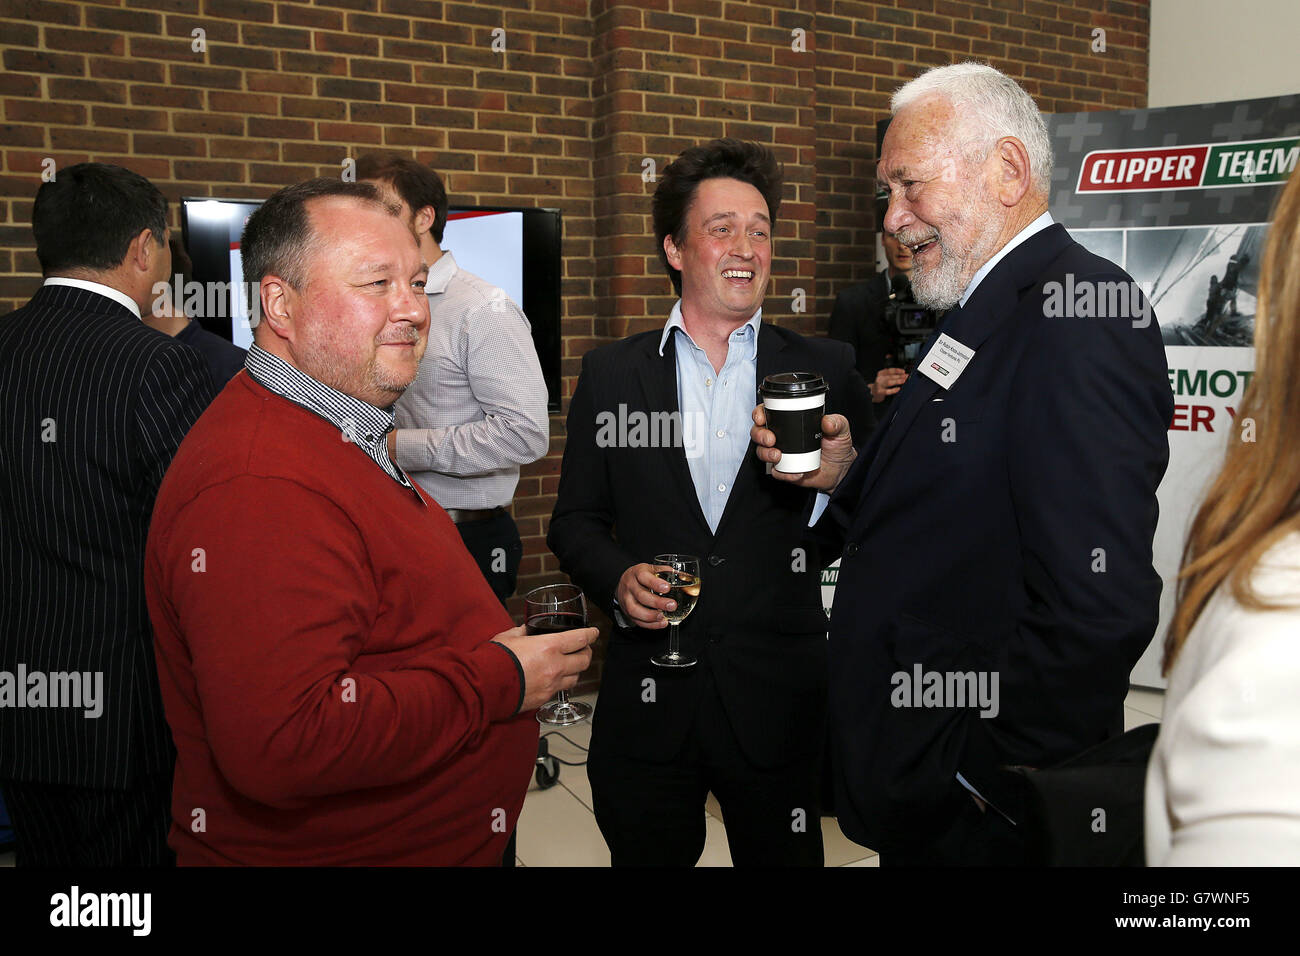 Clipper Ventures PLC's Sir Robin Knox-Johnston (right) at the Clipper Telemed+ Anouncement Stock Photo